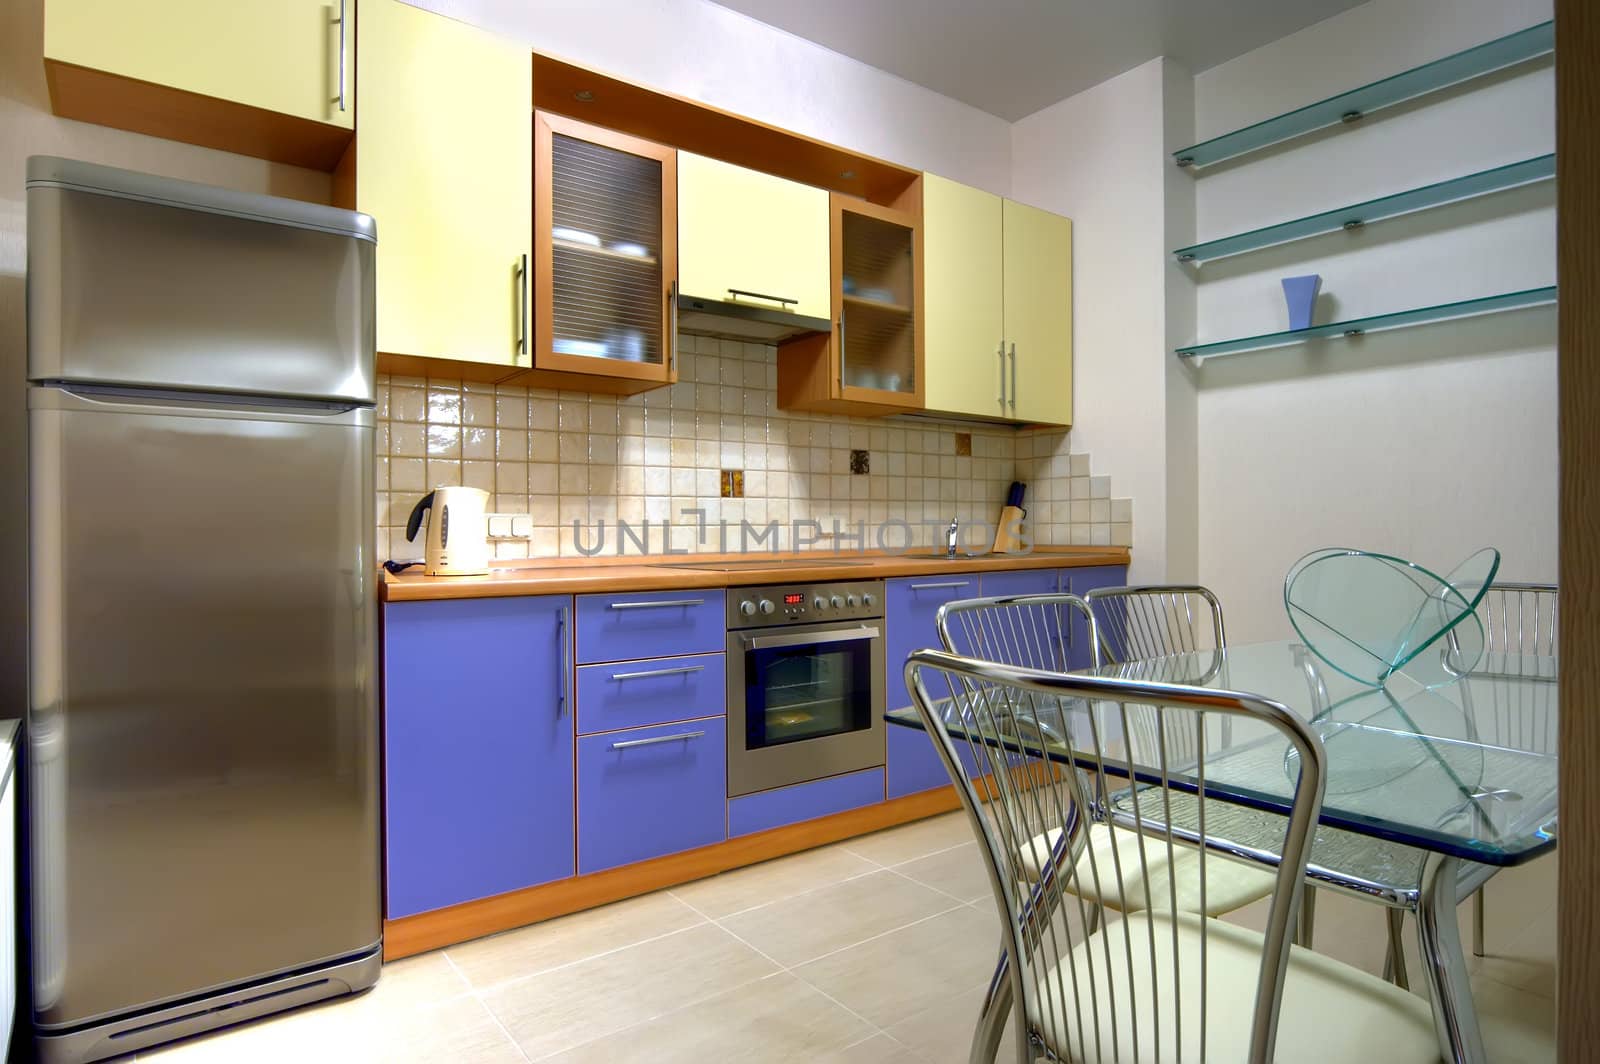 Kitchen with the built in home appliances by MIL